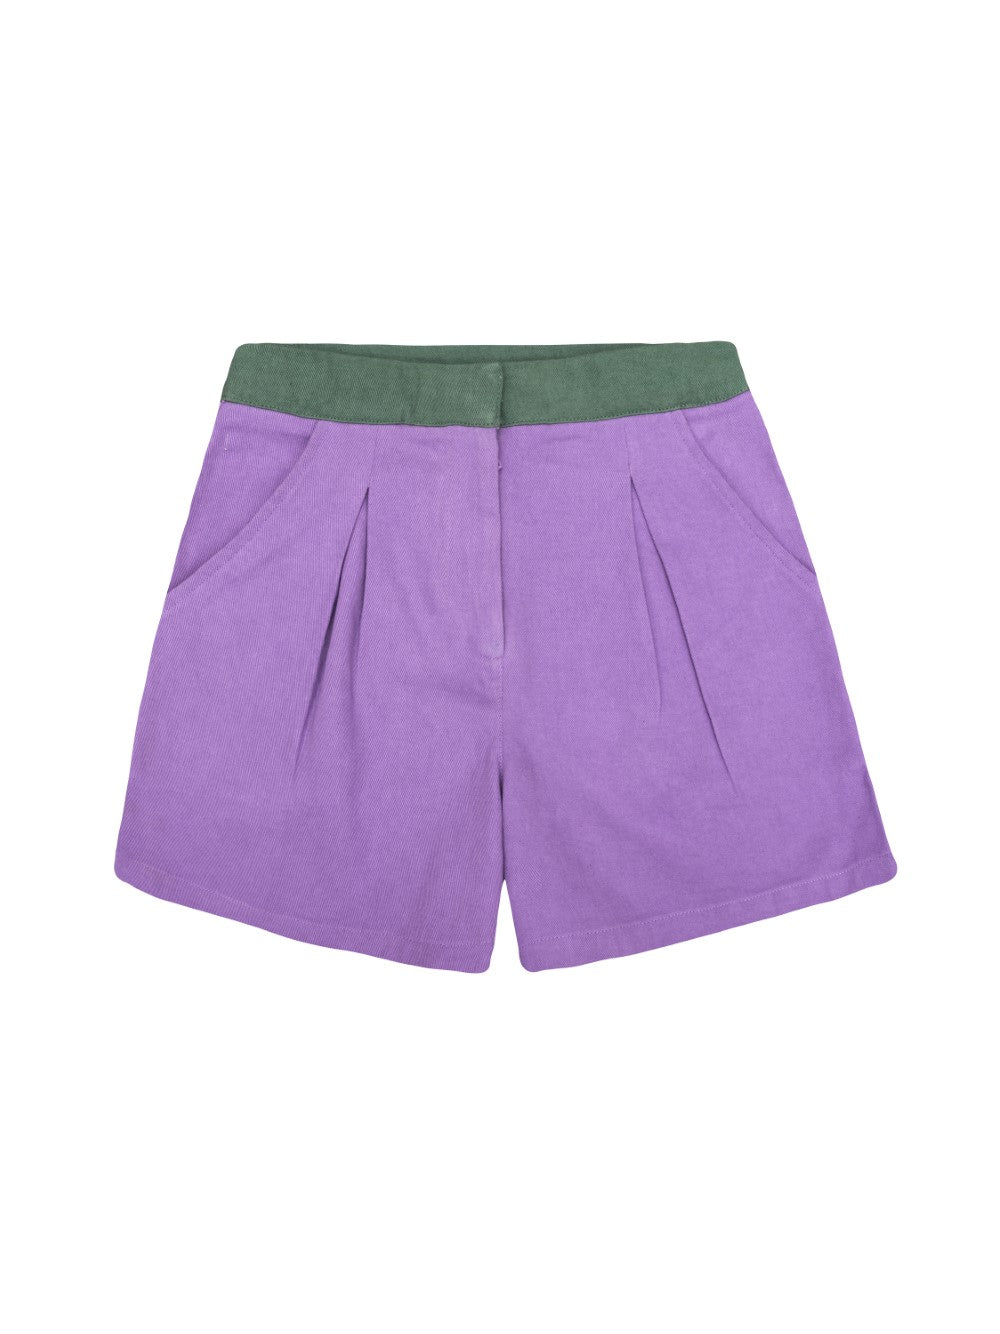 Green and Purple Shorts